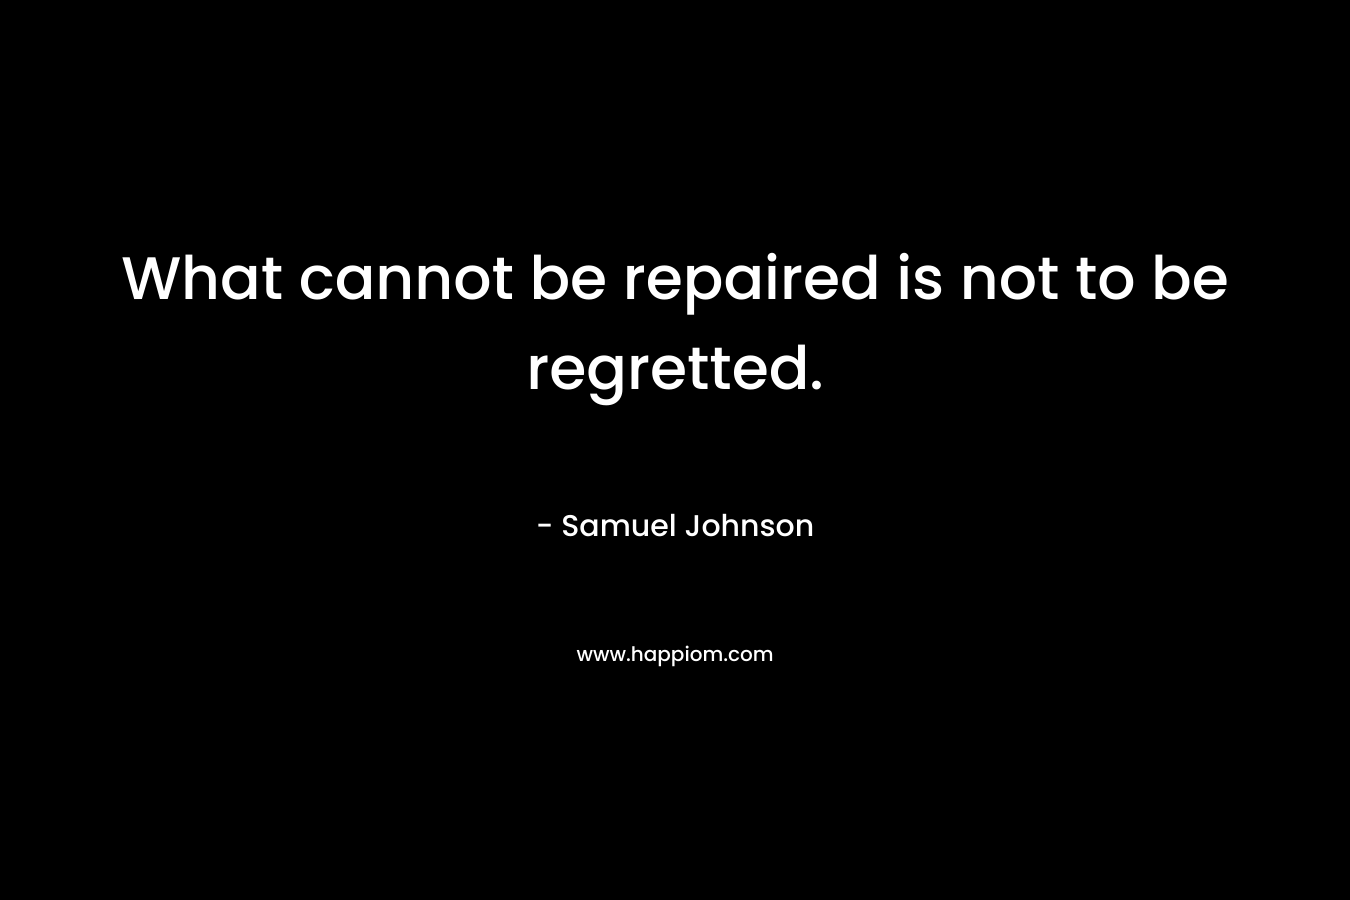 What cannot be repaired is not to be regretted.